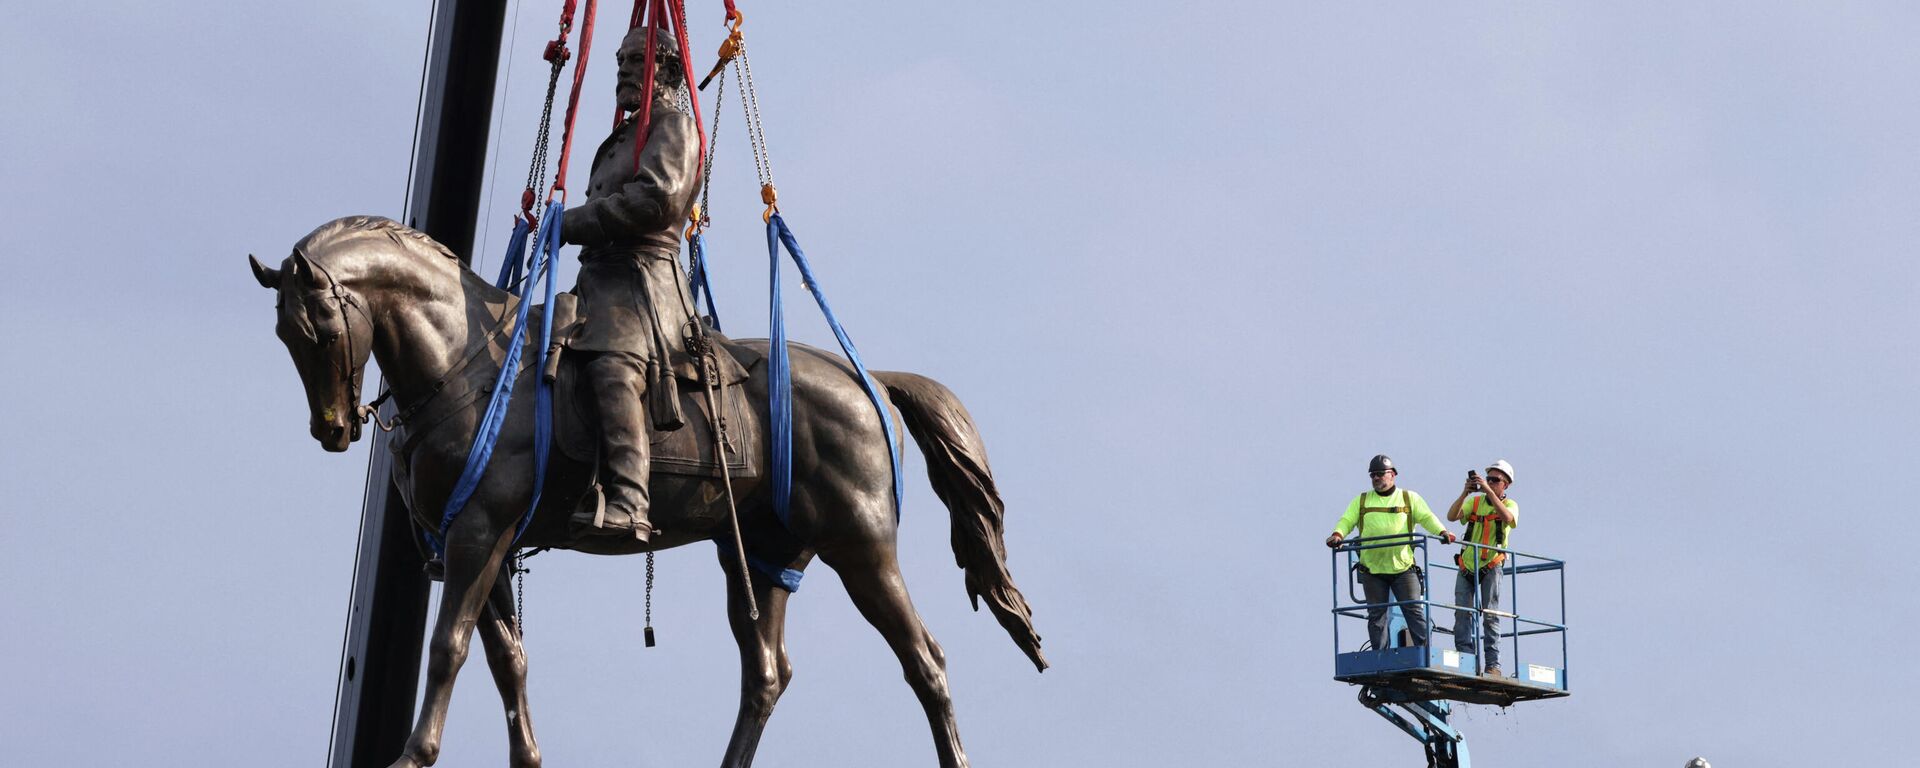 The statue of Robert E. Lee is lowered from its pedestal at Robert E. Lee Memorial during a removal September 8, 2021 in Richmond, Virginia - Sputnik International, 1920, 09.09.2021